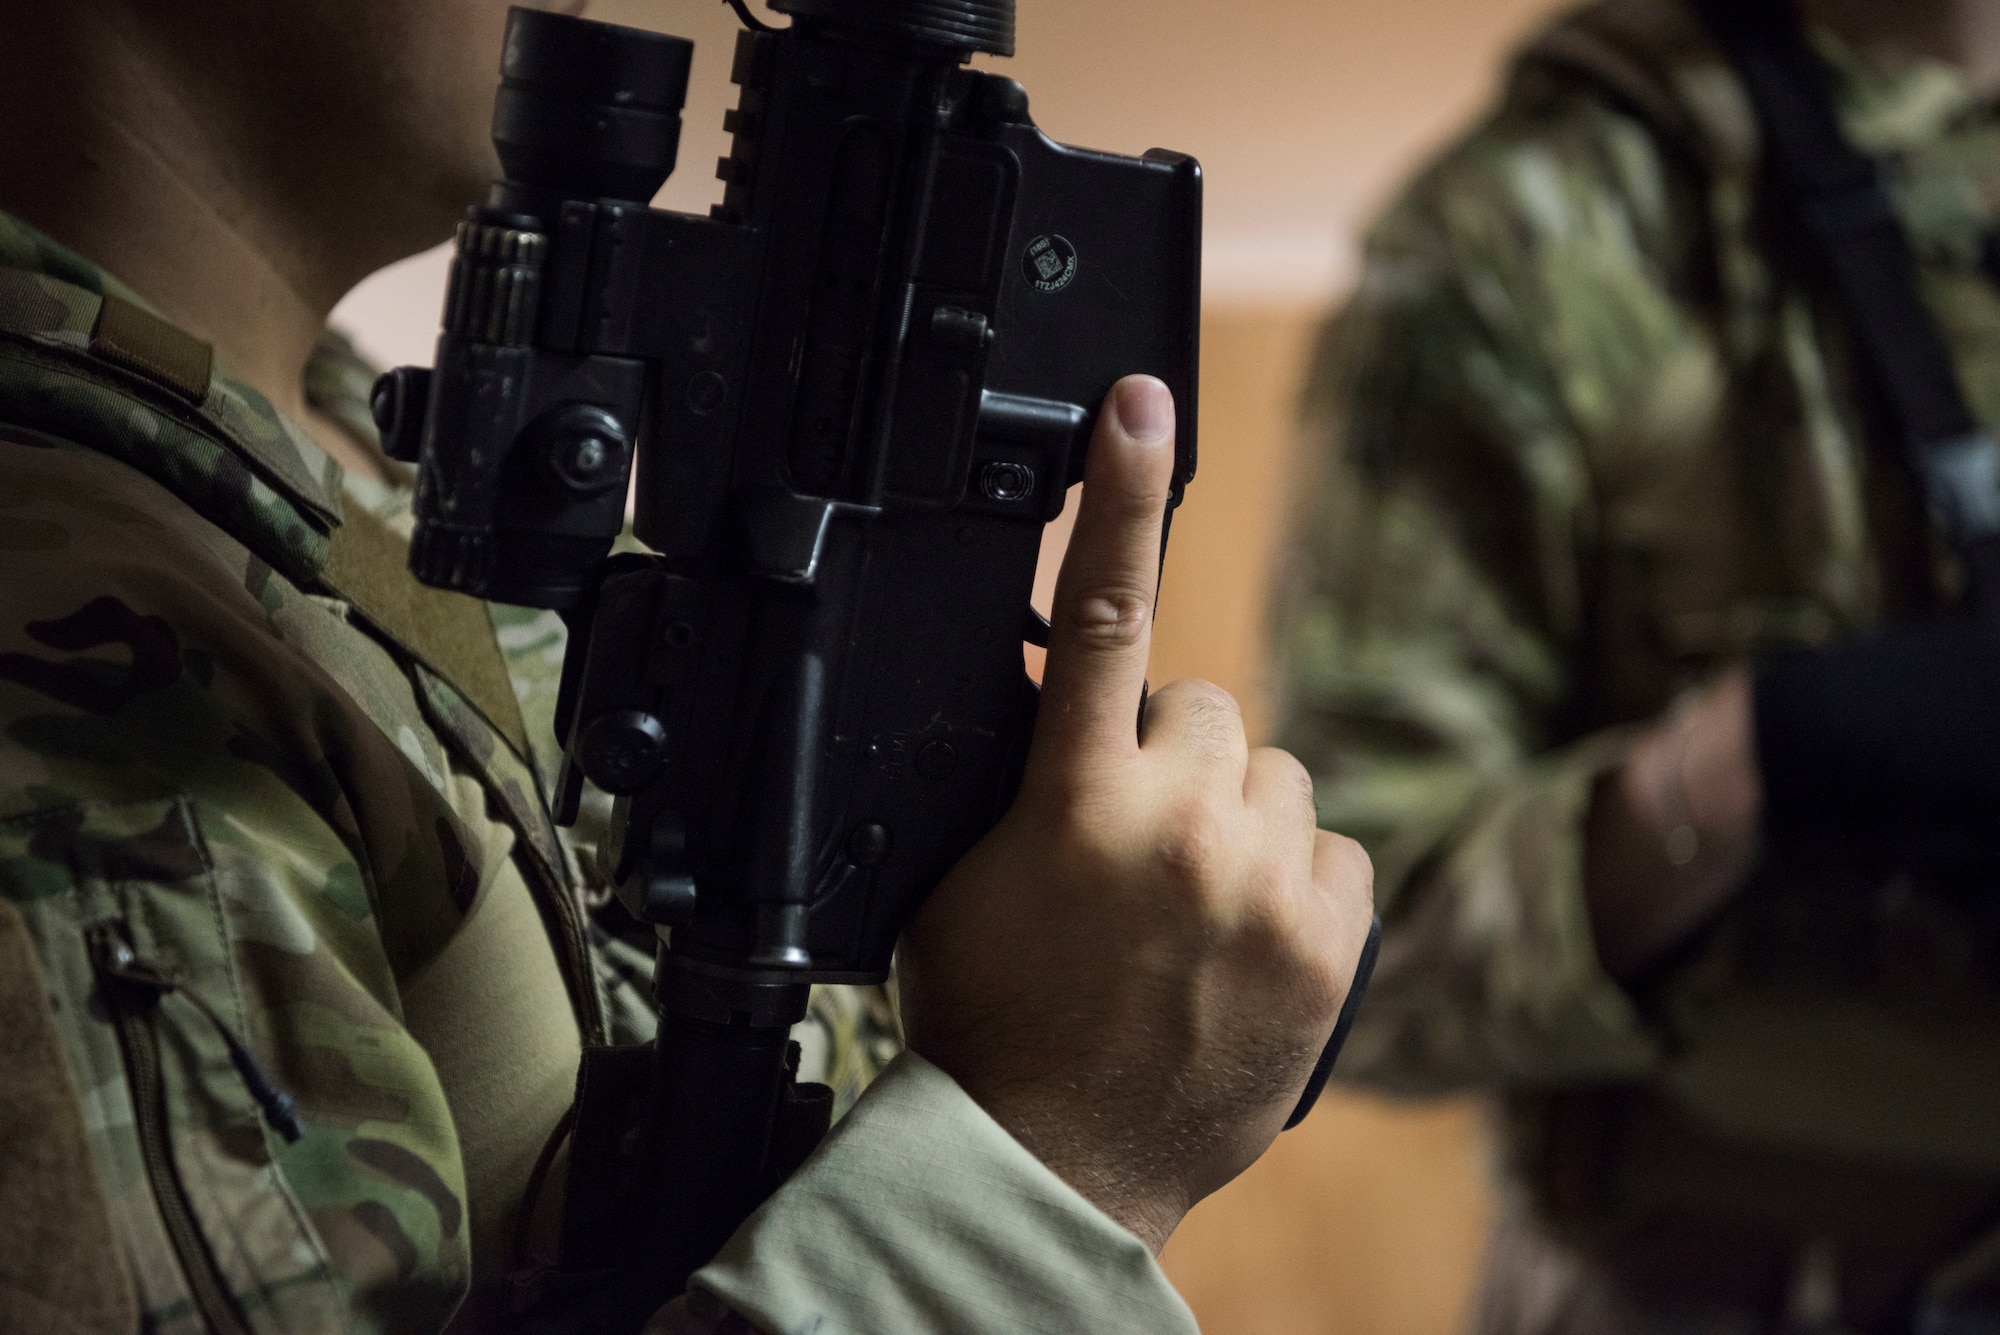 A U.S. Air Force Airman assigned to the 435th Security Forces Squadron practices trigger discipline during close quarters battle training.